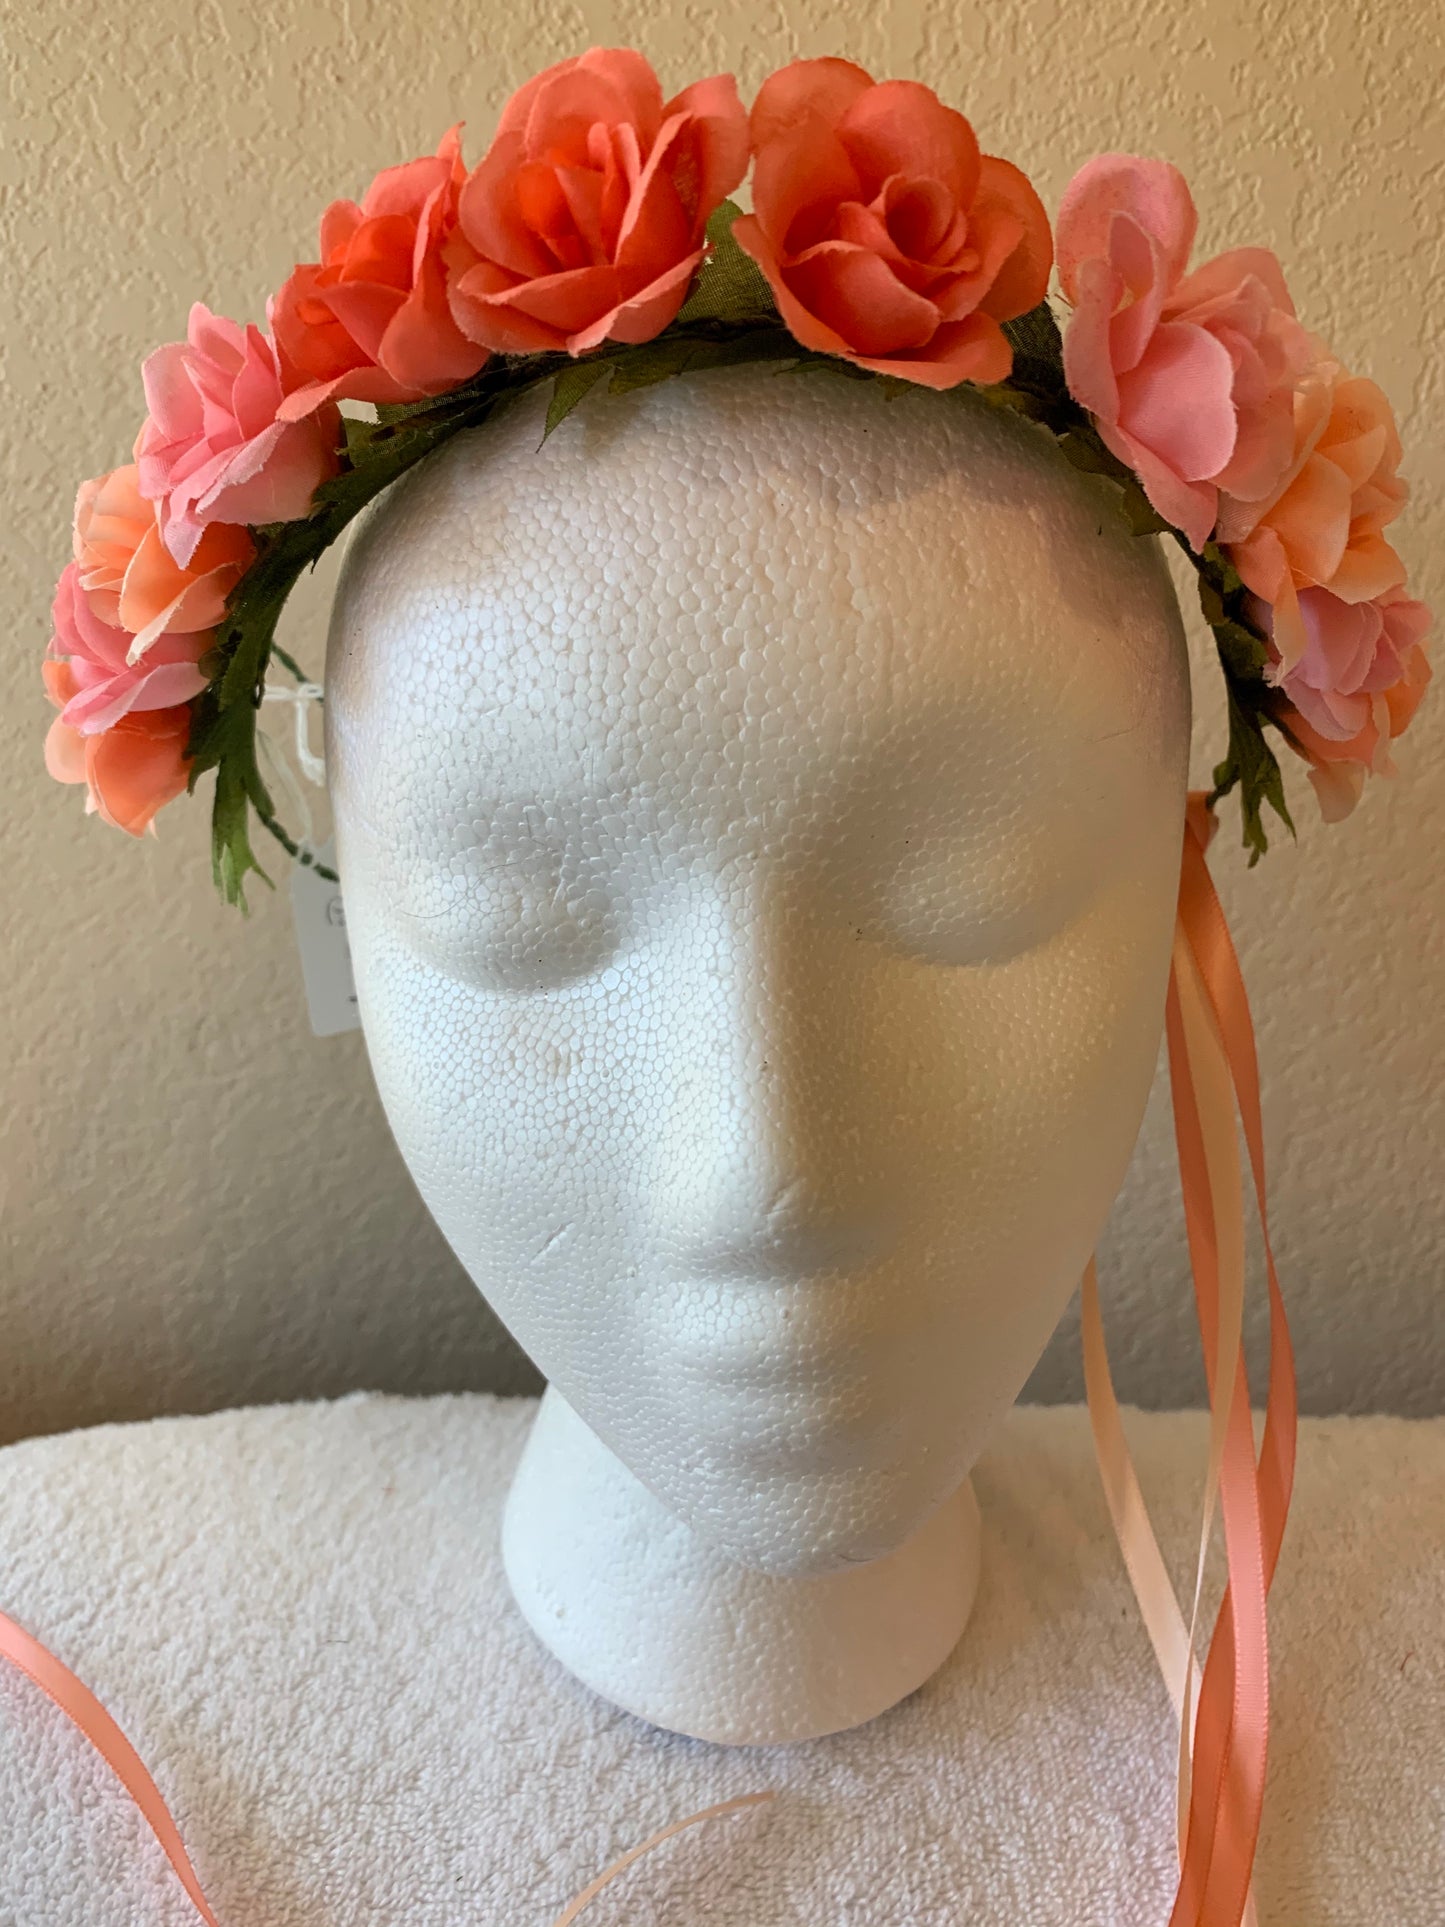 Extra Small Wreath - Salmon Peach and Pink Roses